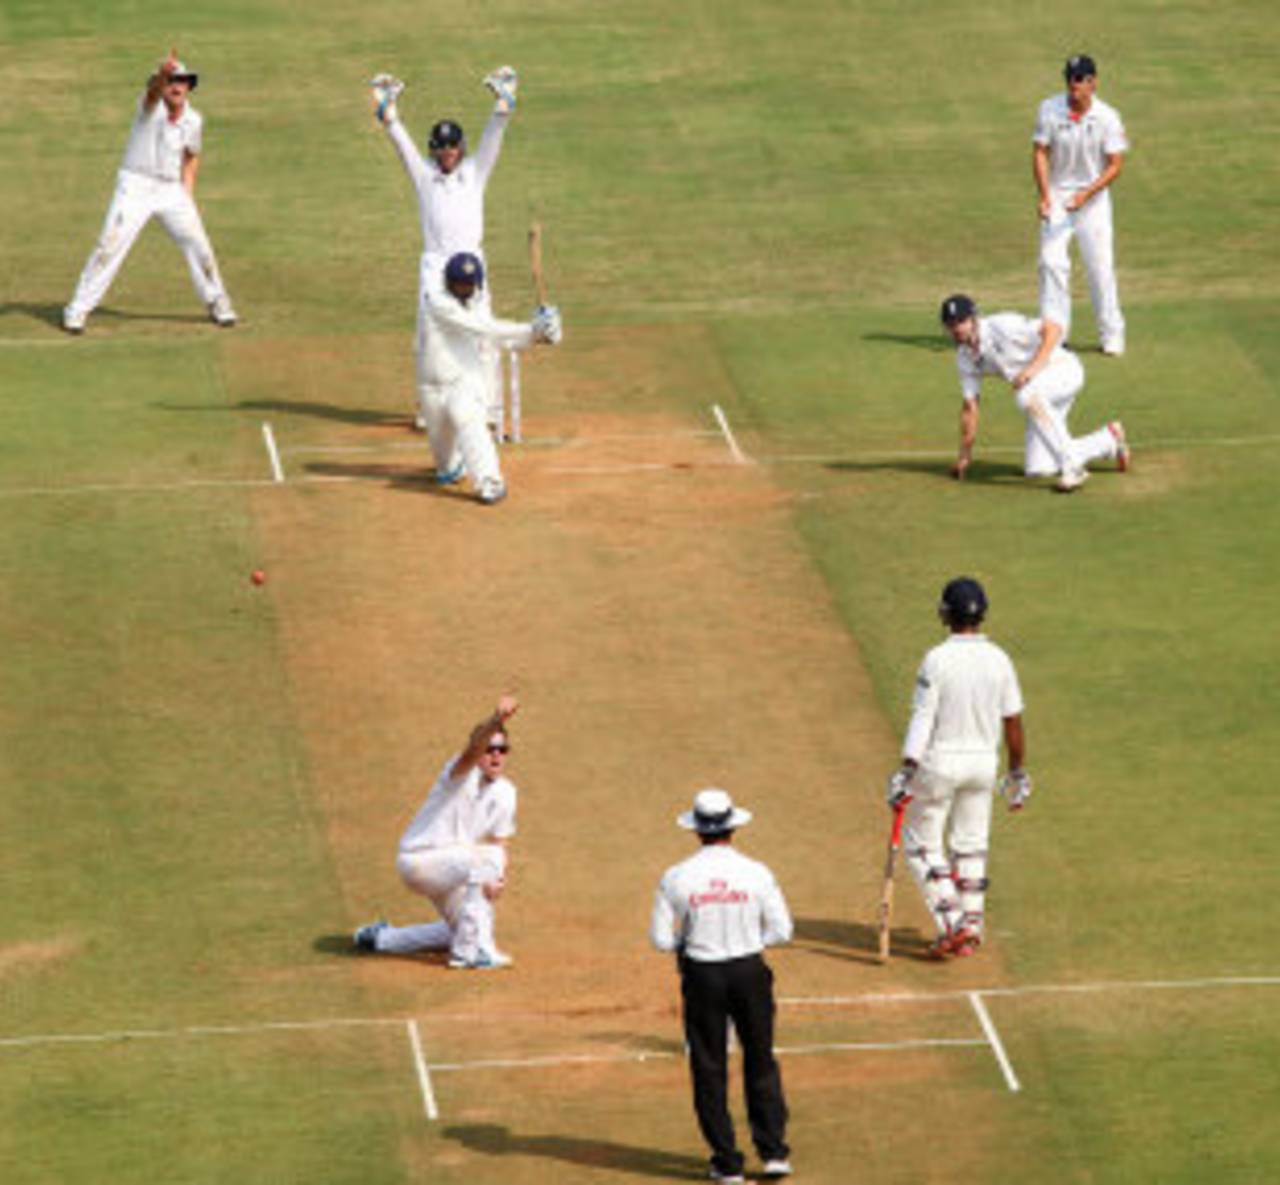 Graeme Swann trapped Harbhajan Singh lbw for his 200th Test wicket, India v England, 2nd Test, Mumbai, 2nd day, November 24, 2012